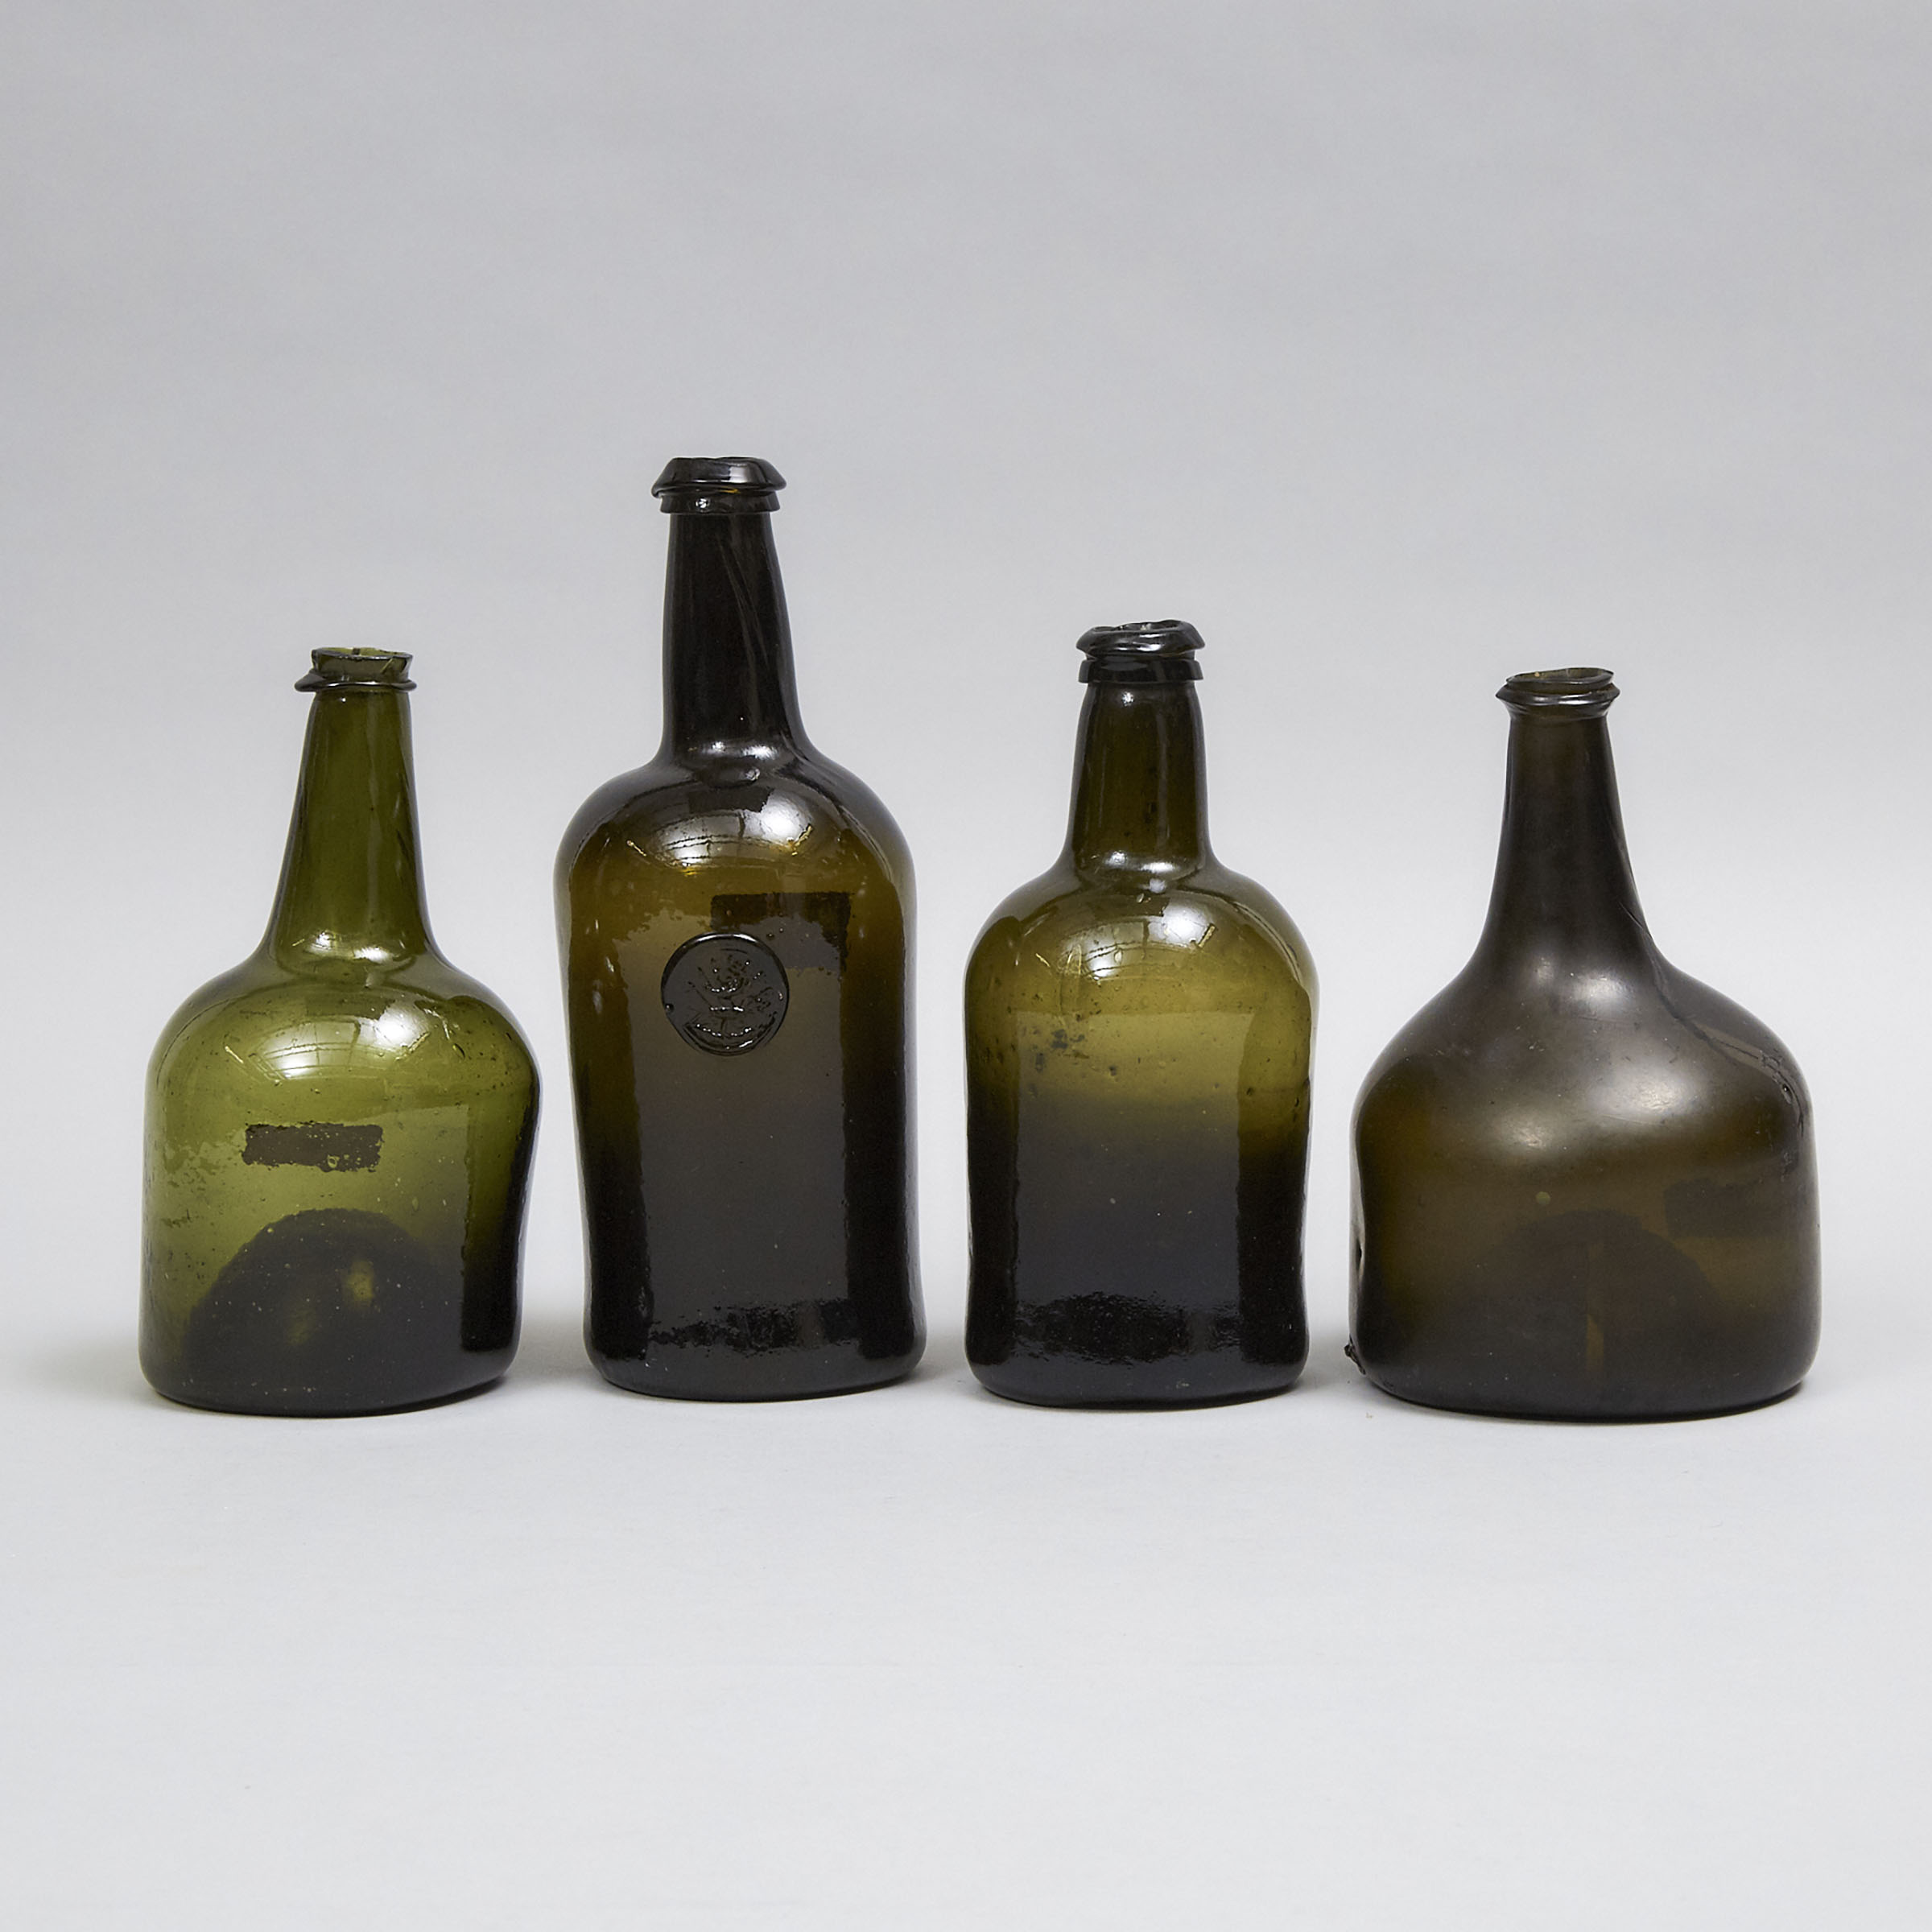 English Green Glass Applied Seal Wine Bottle with Crest and Three Others, 18th/early 19th century